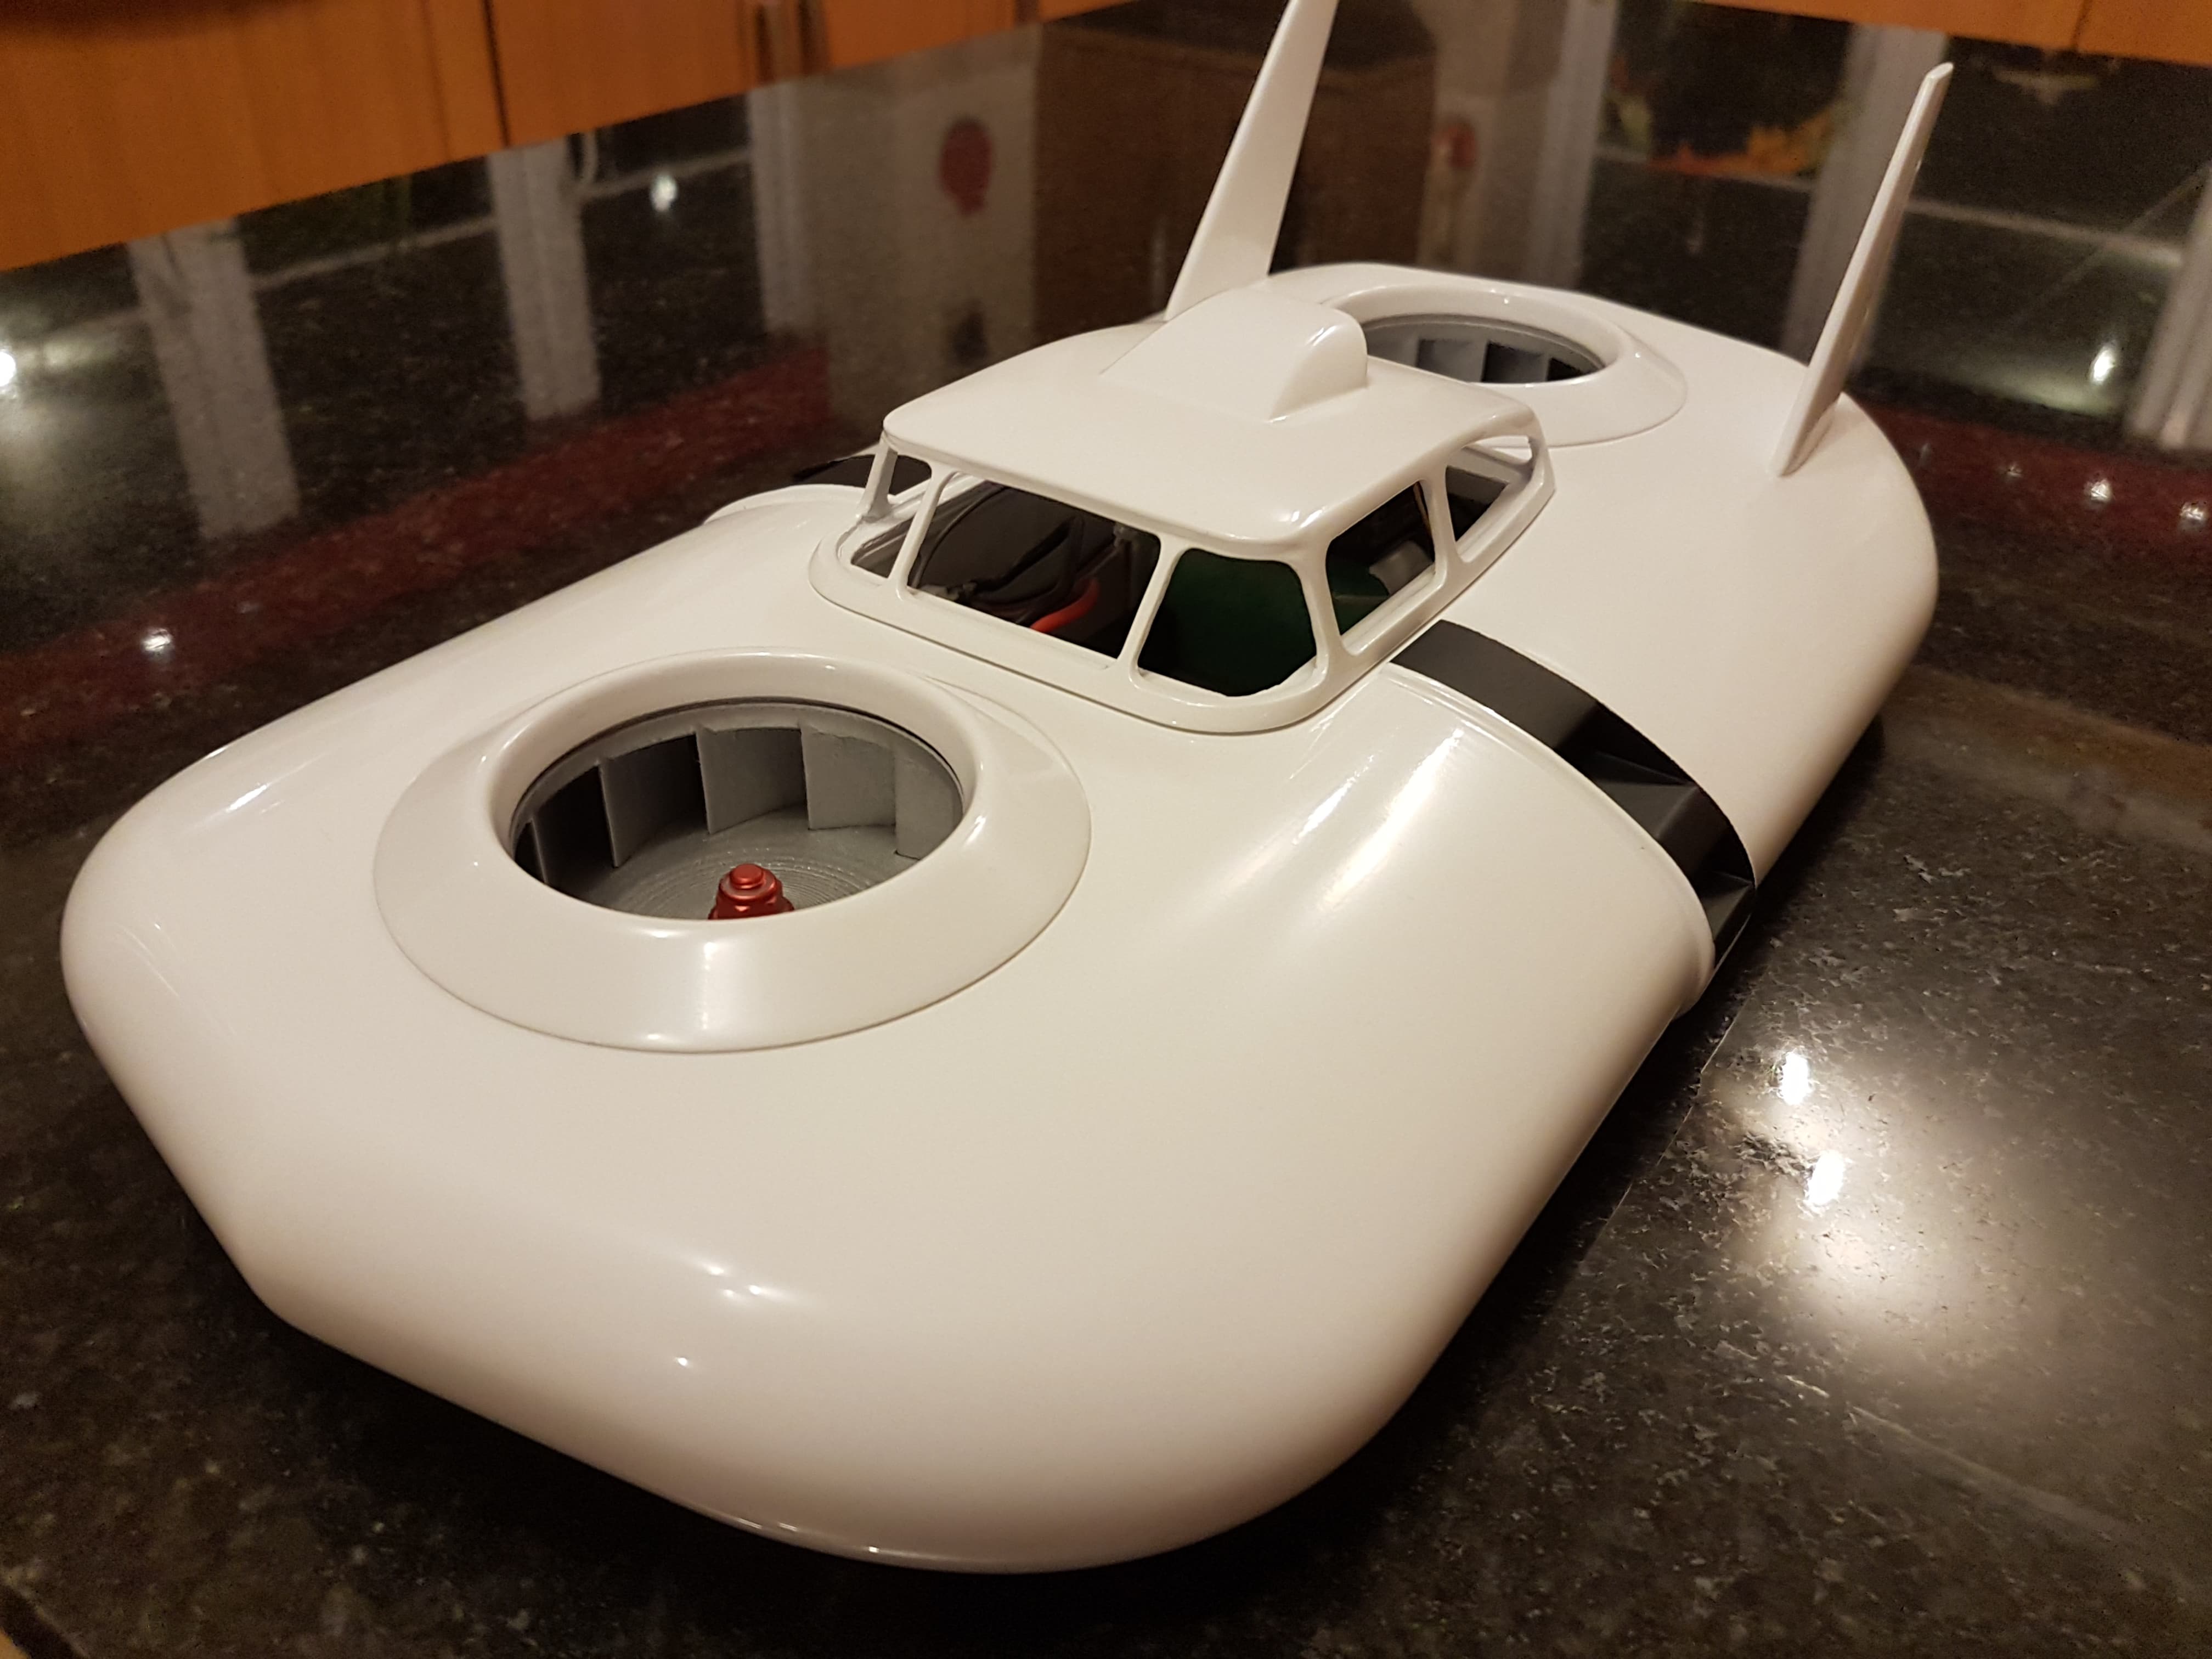 Cc2 002 Cushioncraft Skirtless Hovercraft Rc Model 125 Scale 3D Printed Cc2